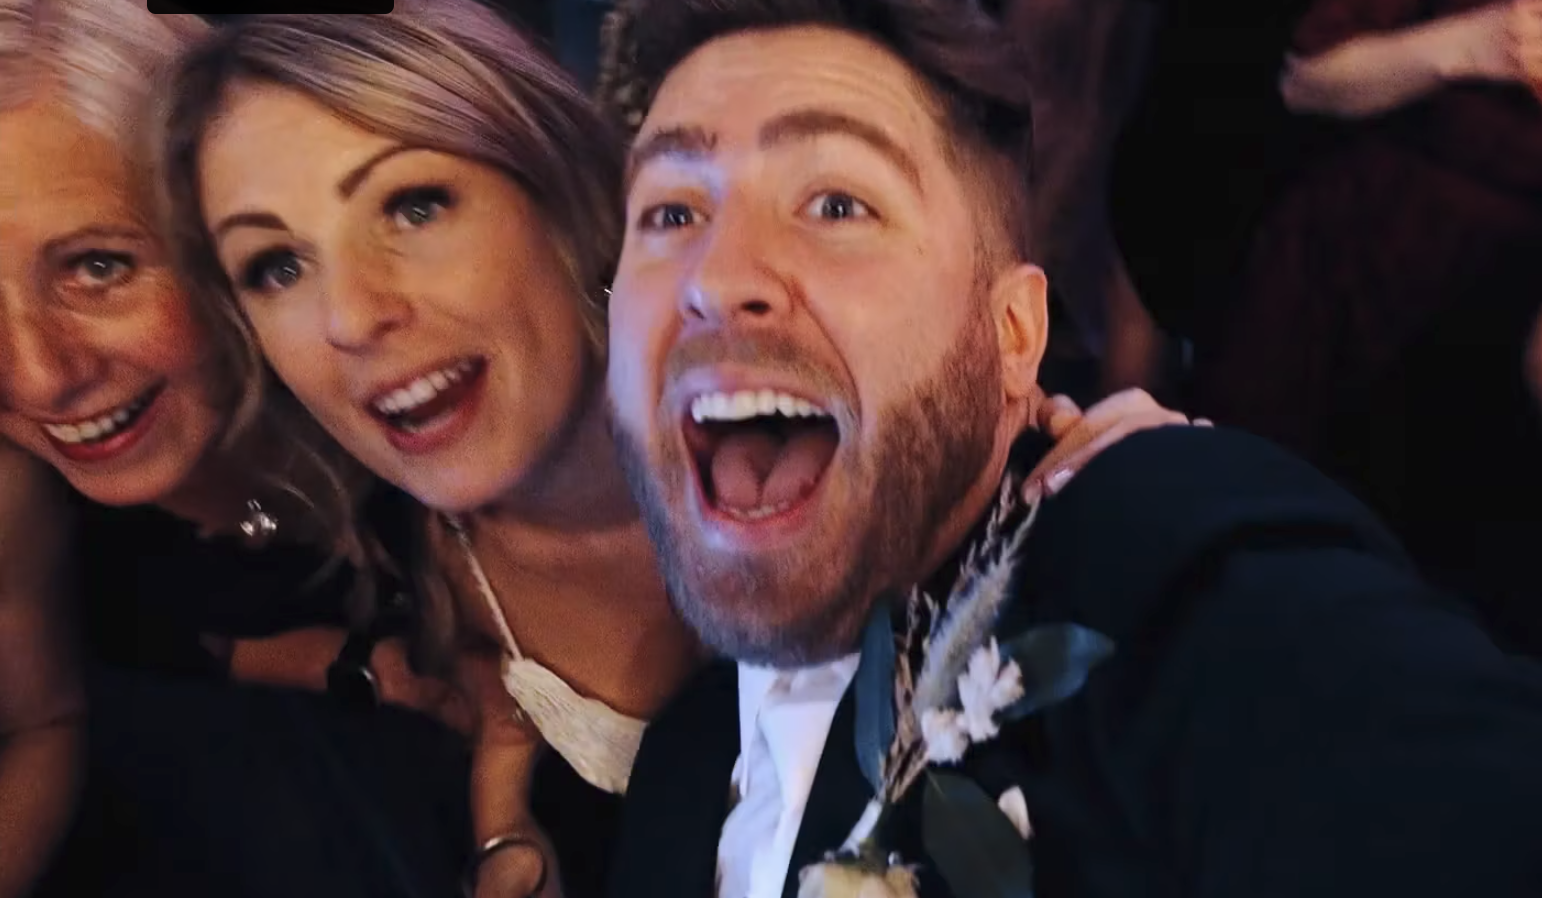 bride and groom take selfie with camera